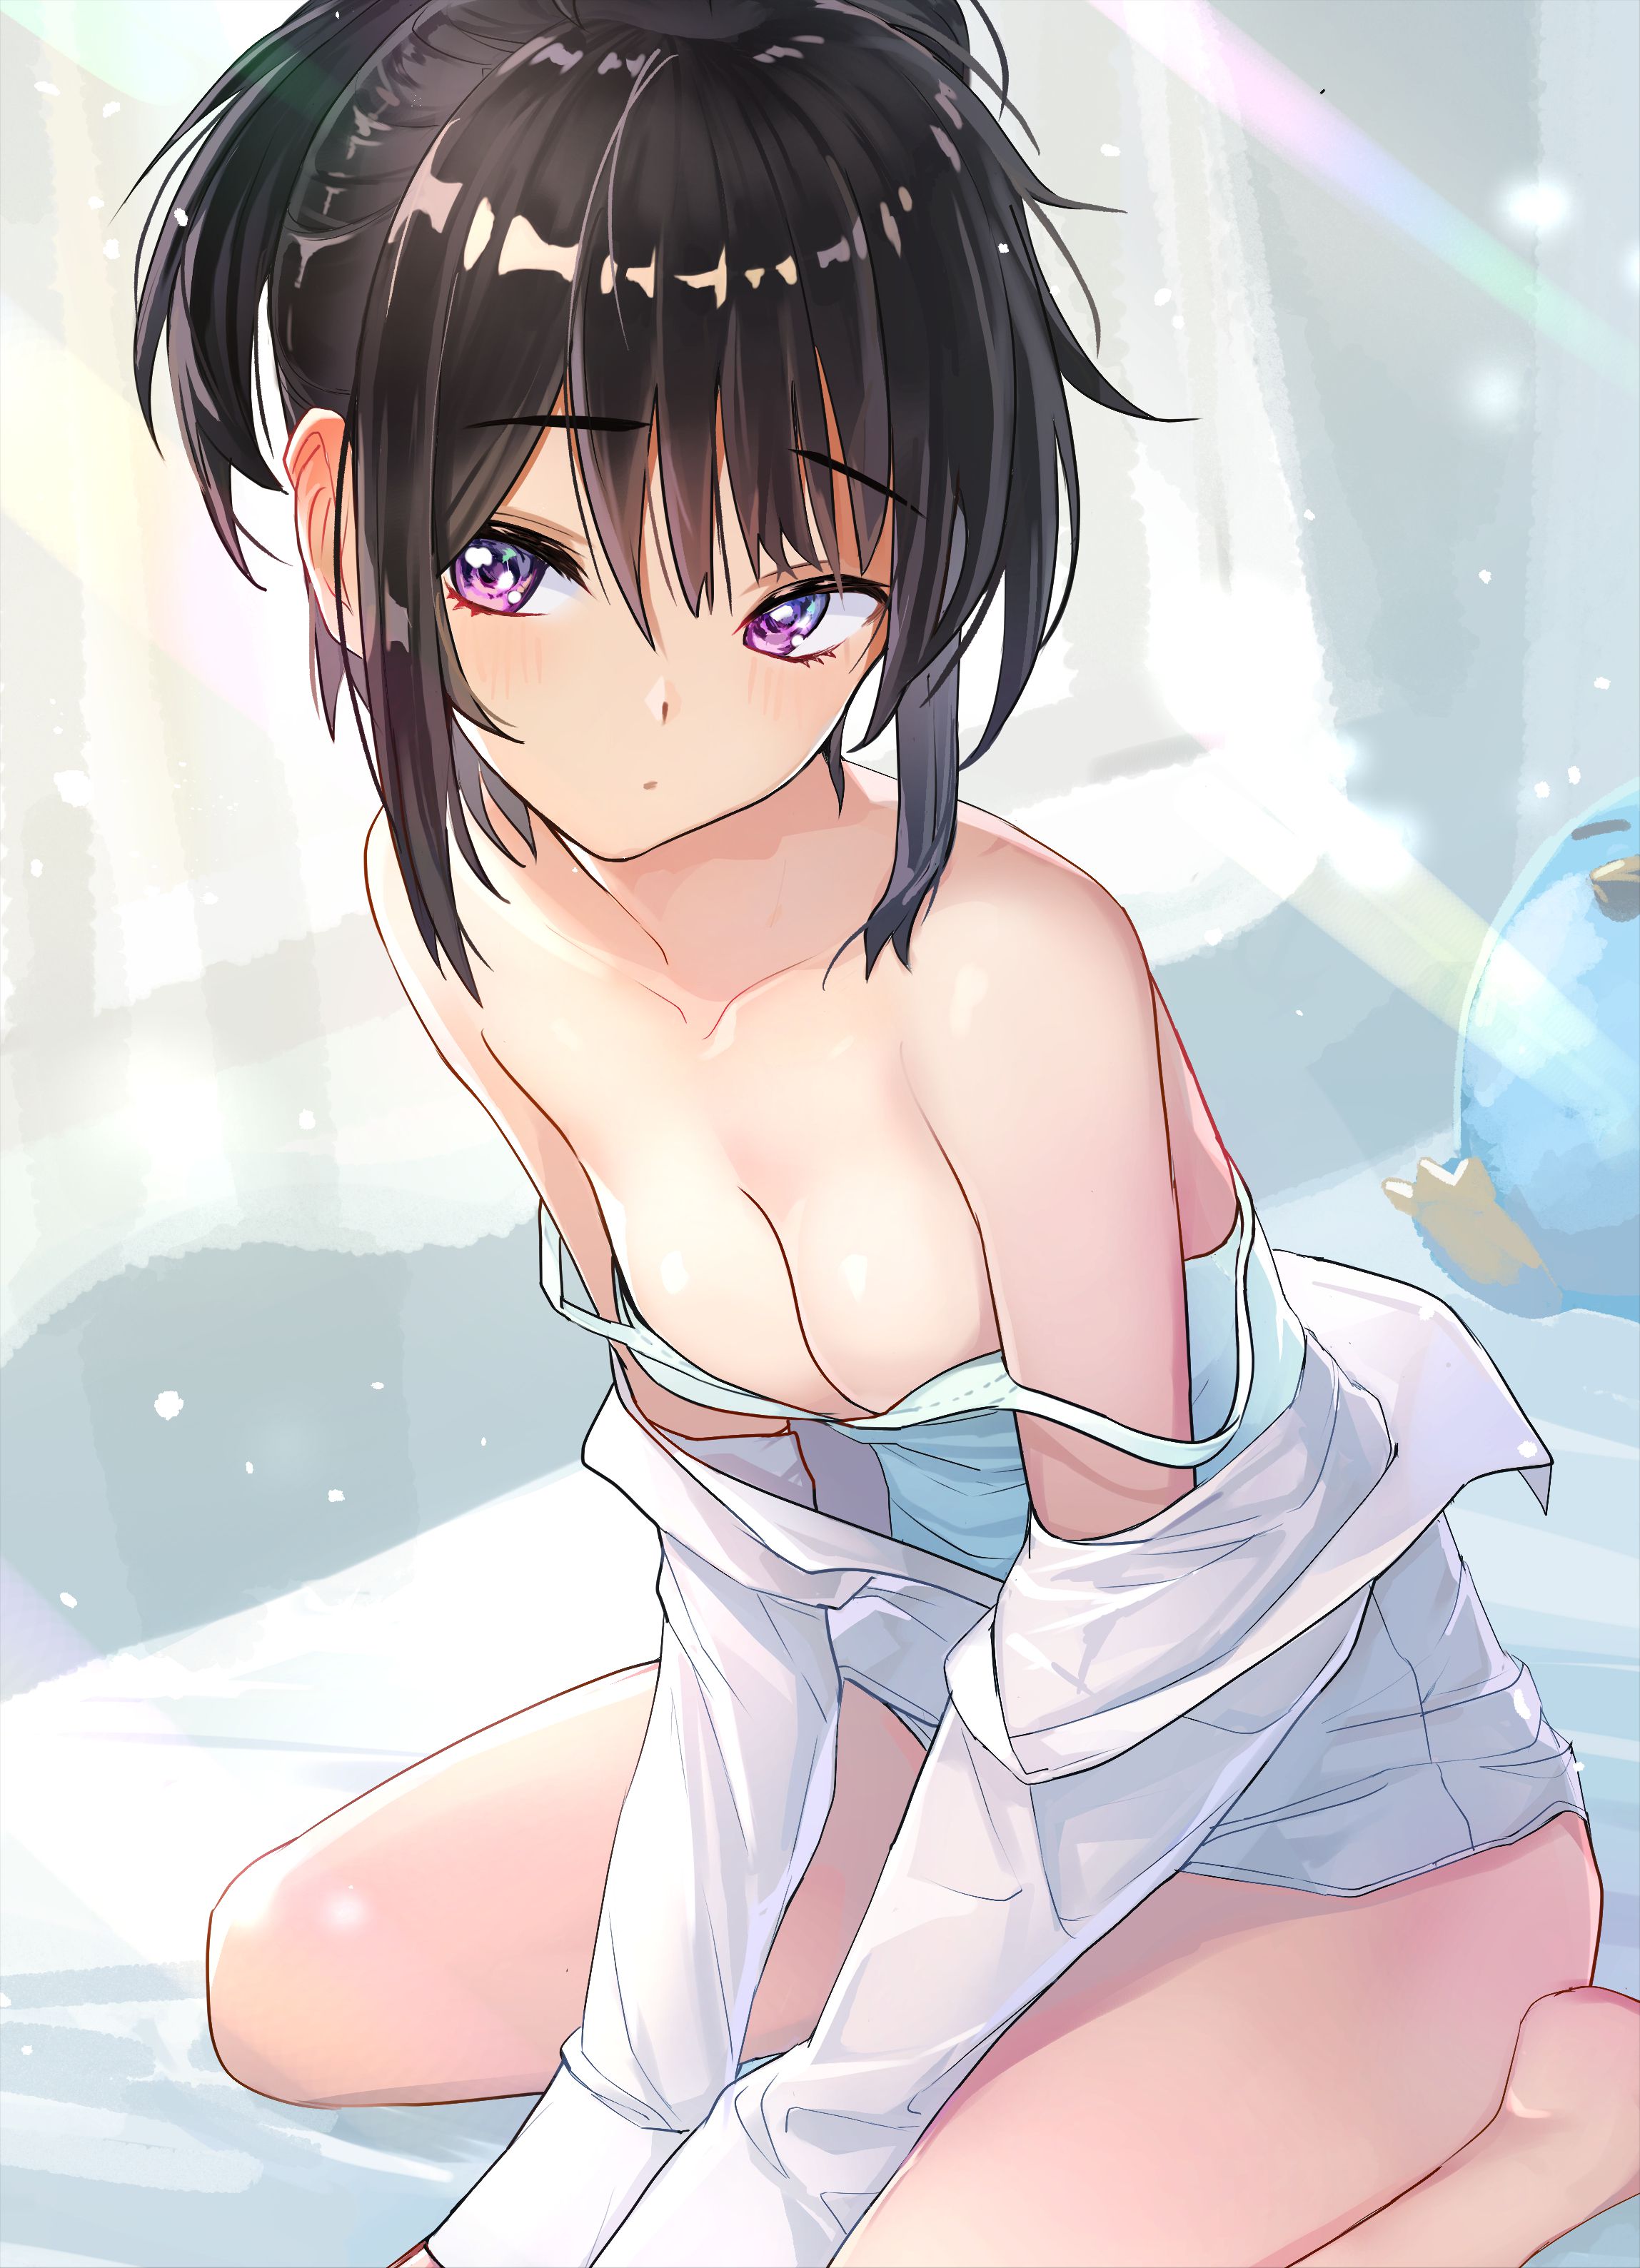 【Erotic Anime Summary】 Valley erotic images of busty beauties 【50 photos】 8